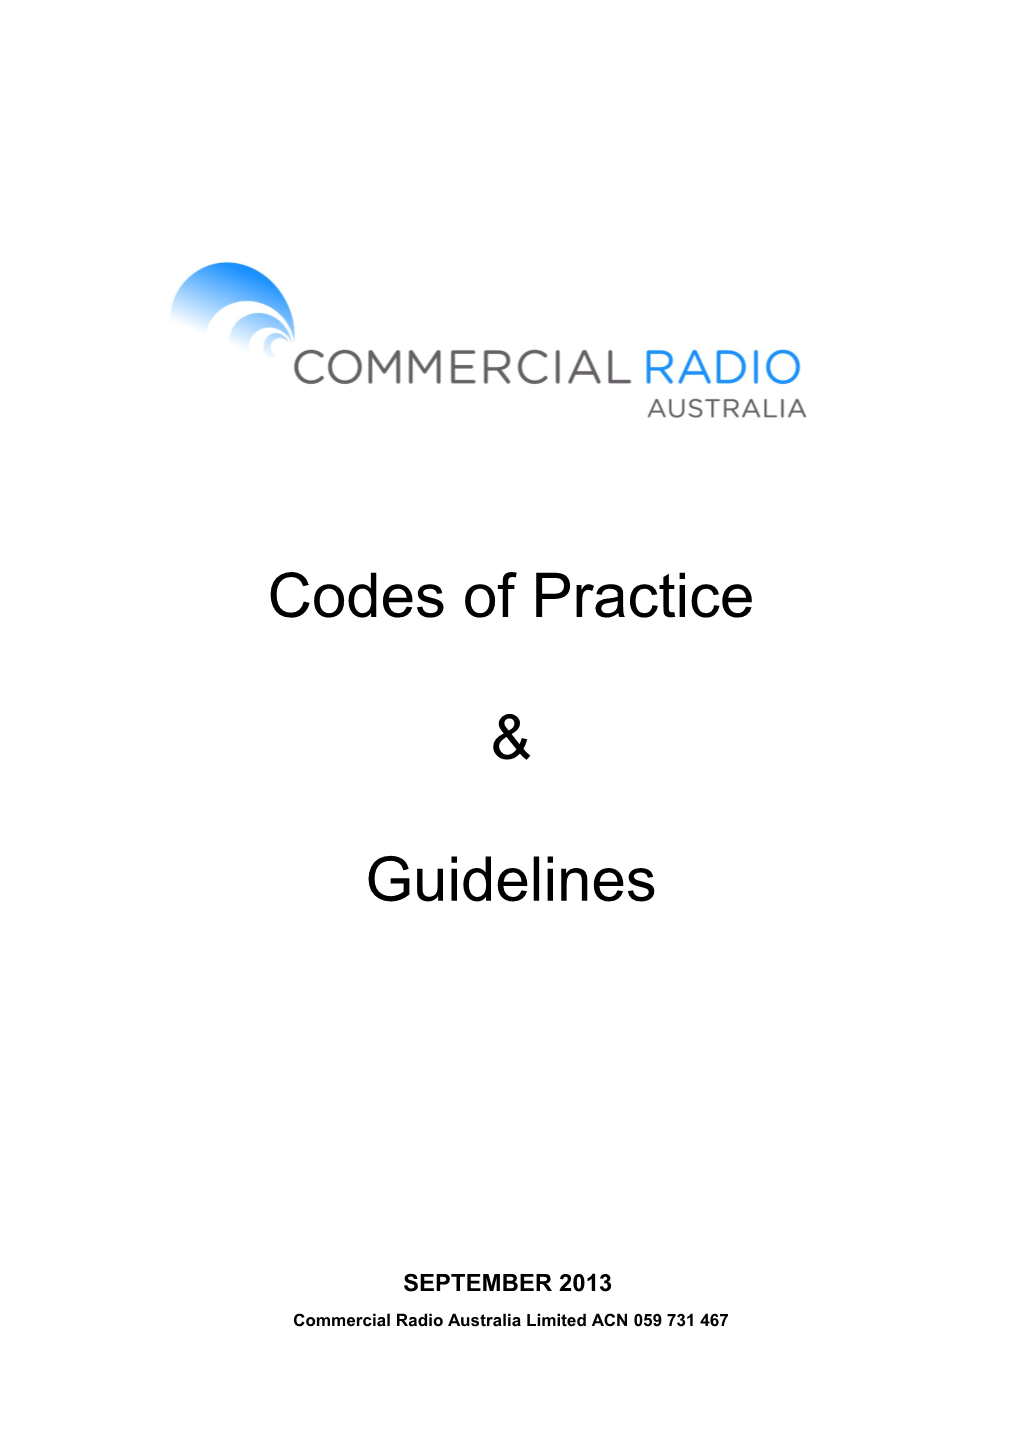 Codes of Practice and Guidelines (Sept 2013)